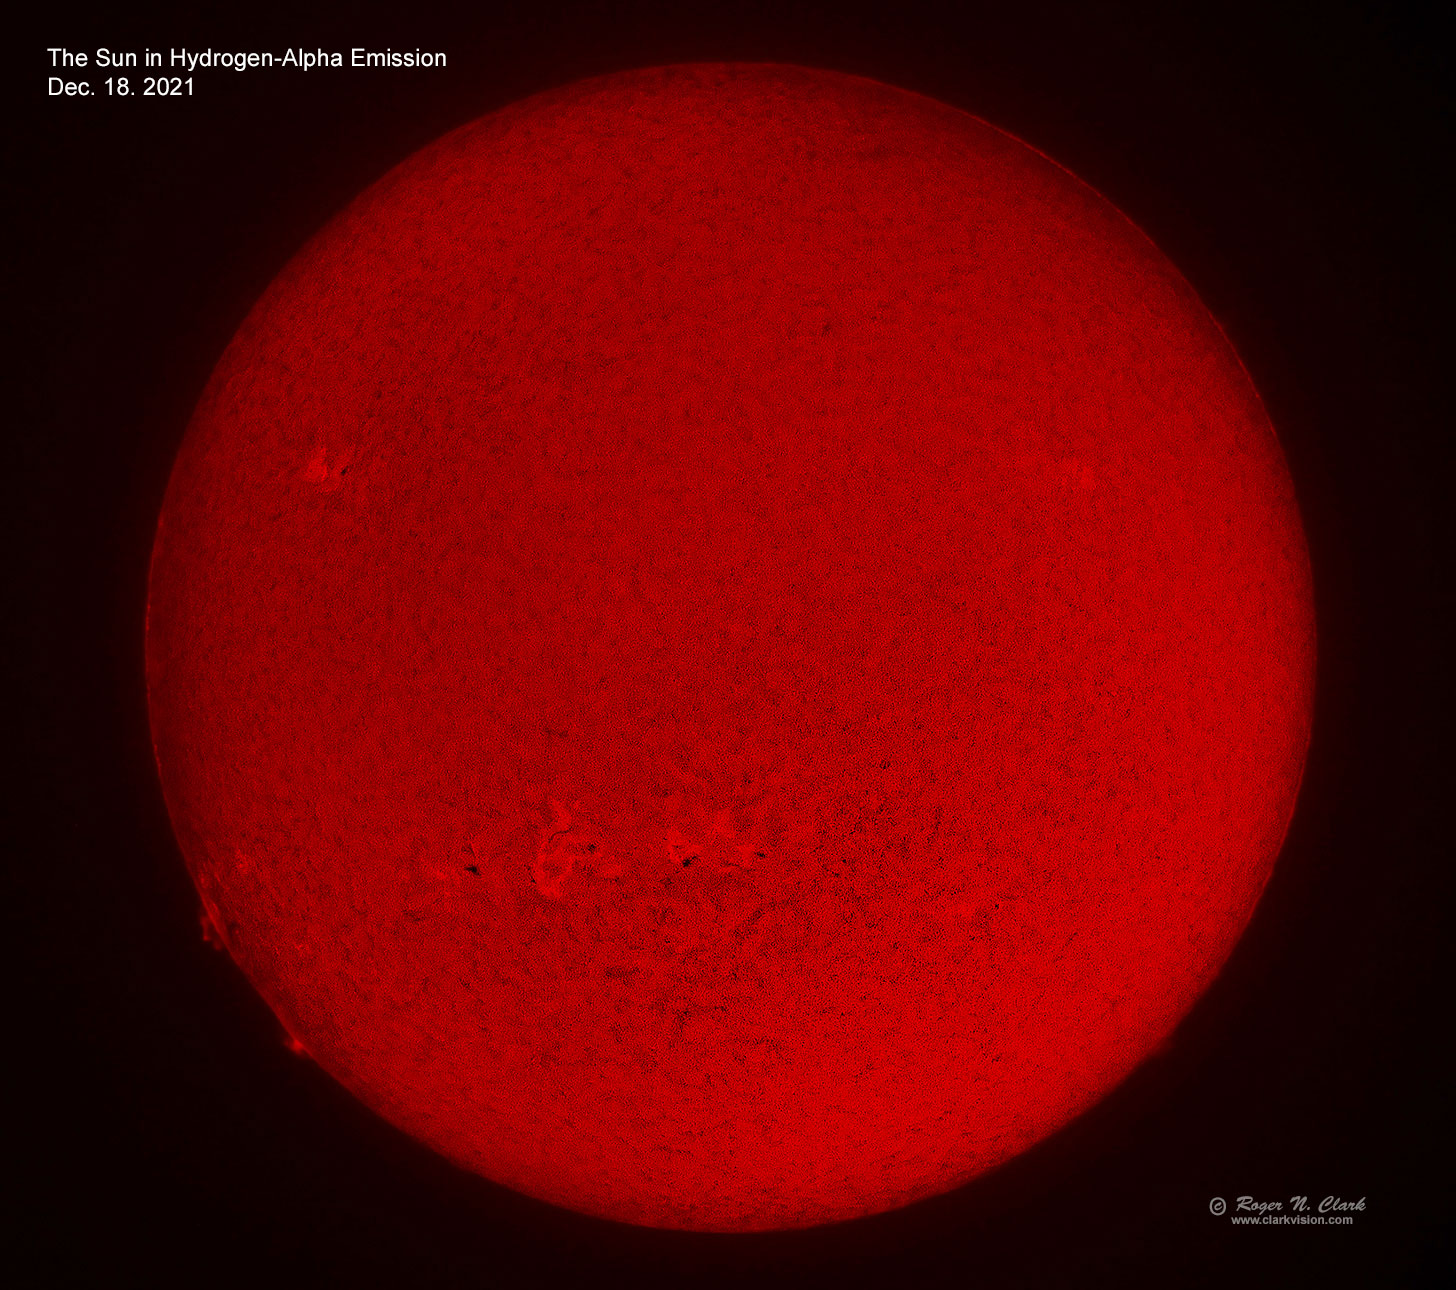 image sun-h-alpha-1290mm-r5-2021-12-18-4C3A1880+63.e-0.5xs.jpg is Copyrighted by Roger N. Clark, www.clarkvision.com